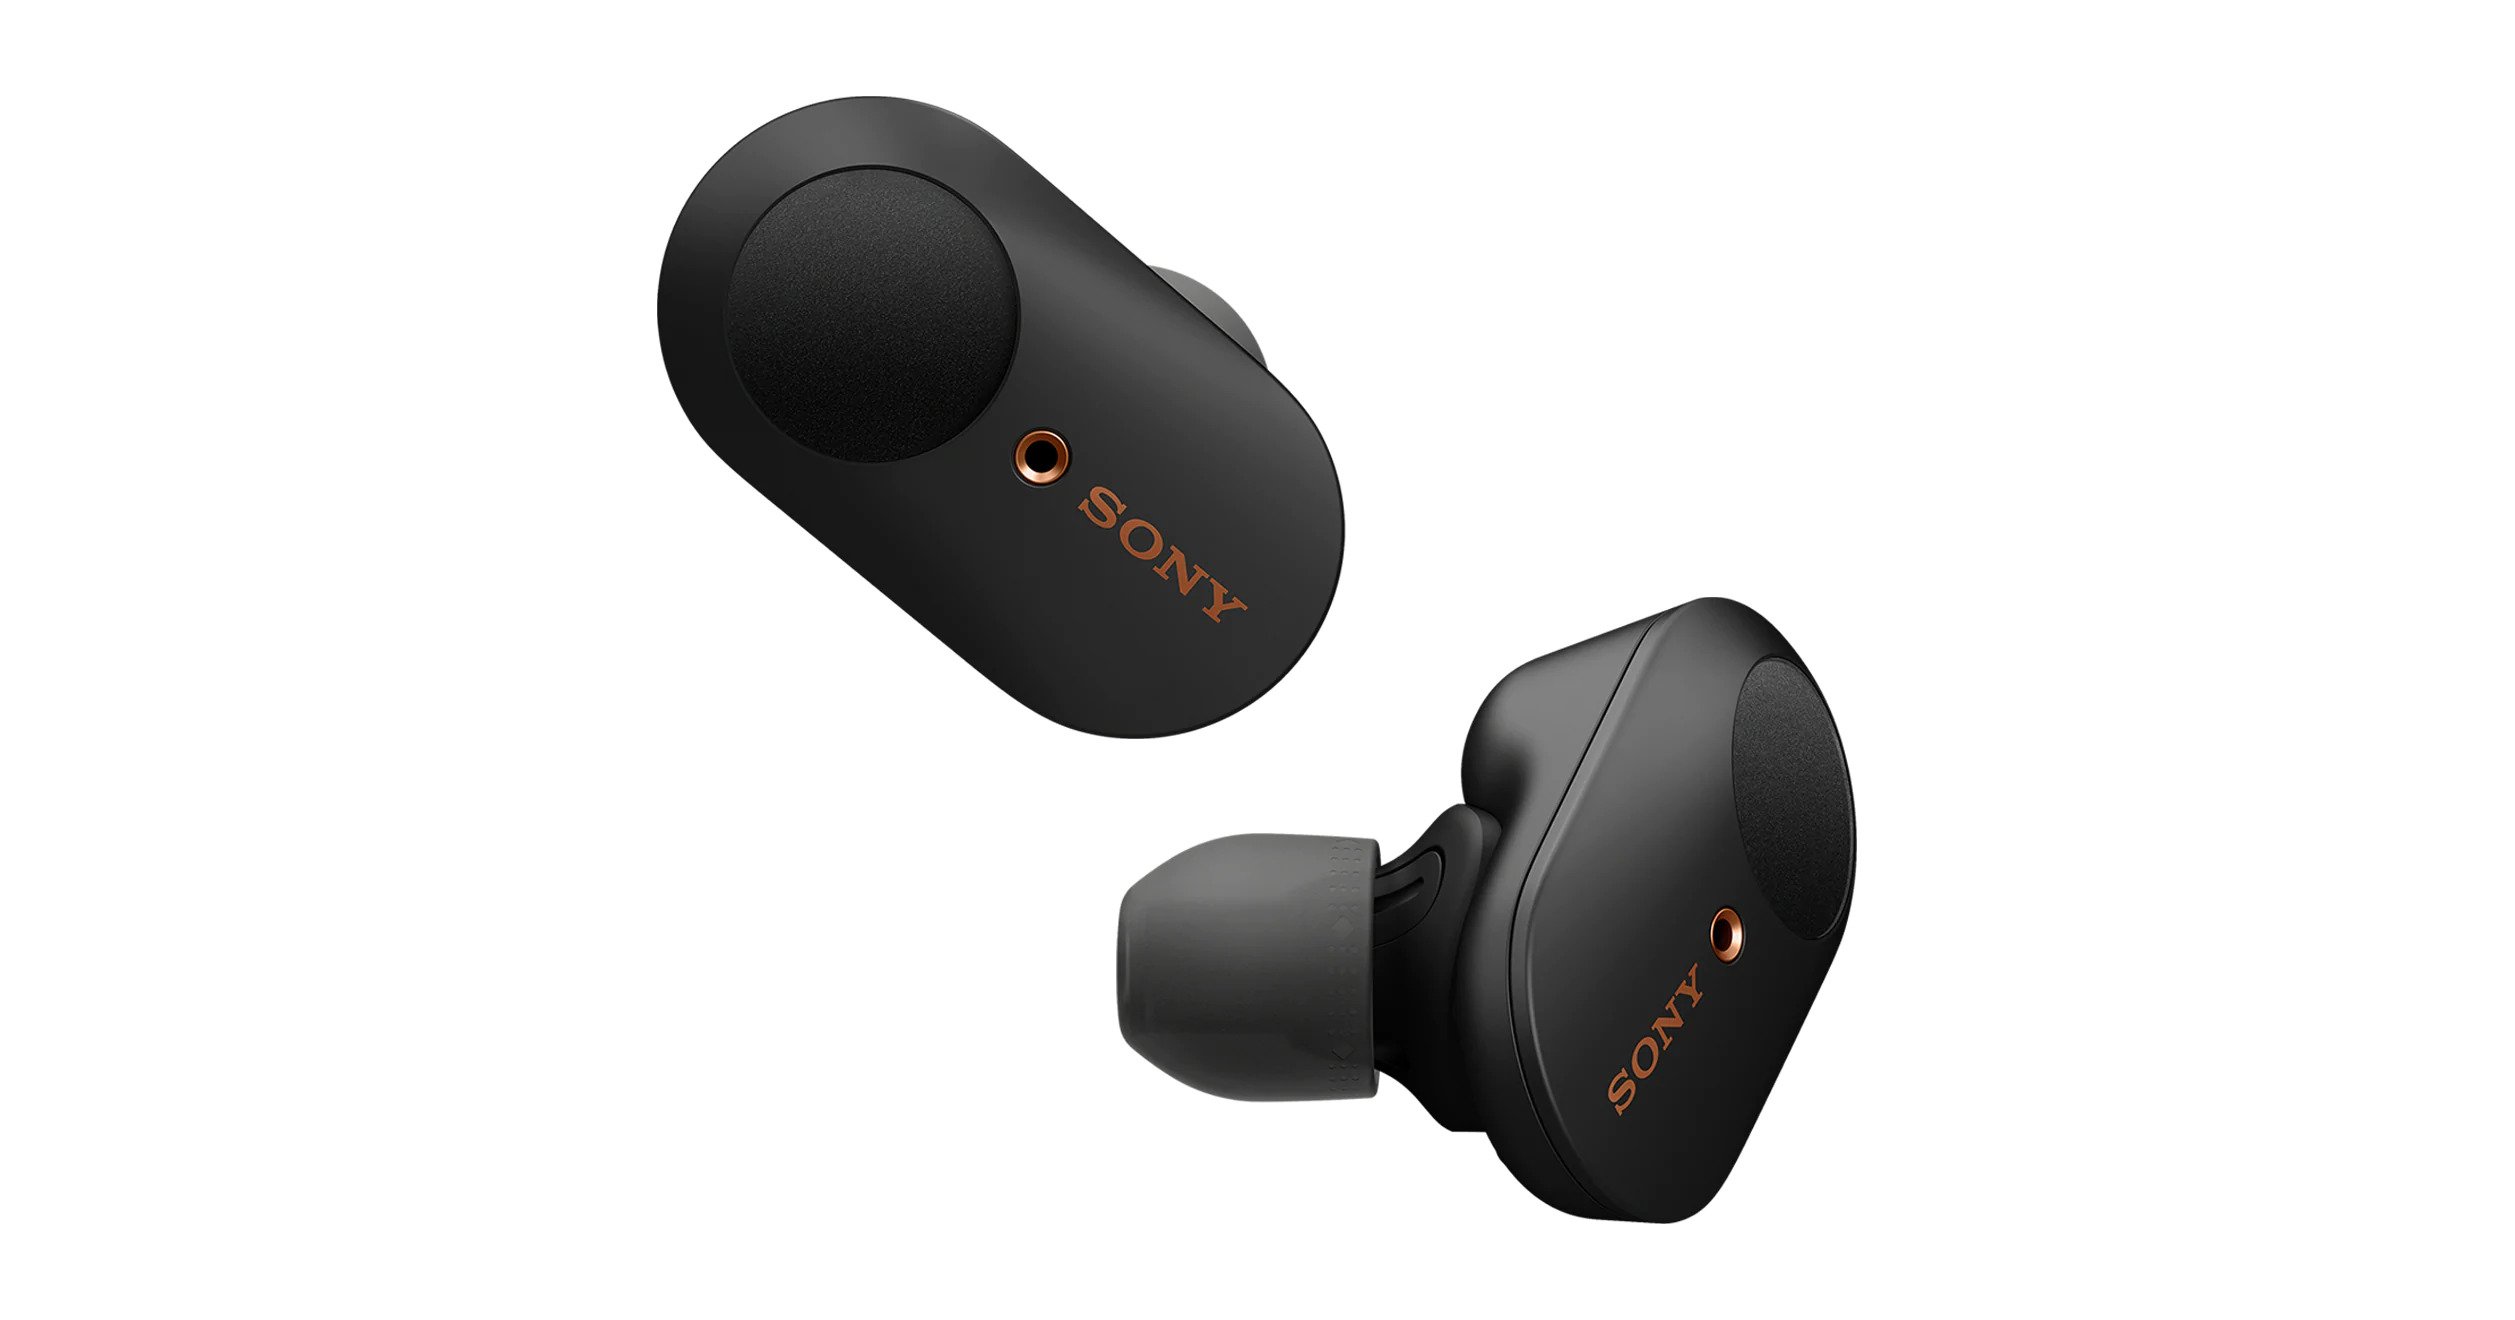 Sony WF-1000XM3 truly wireless earphones with active noise cancellation